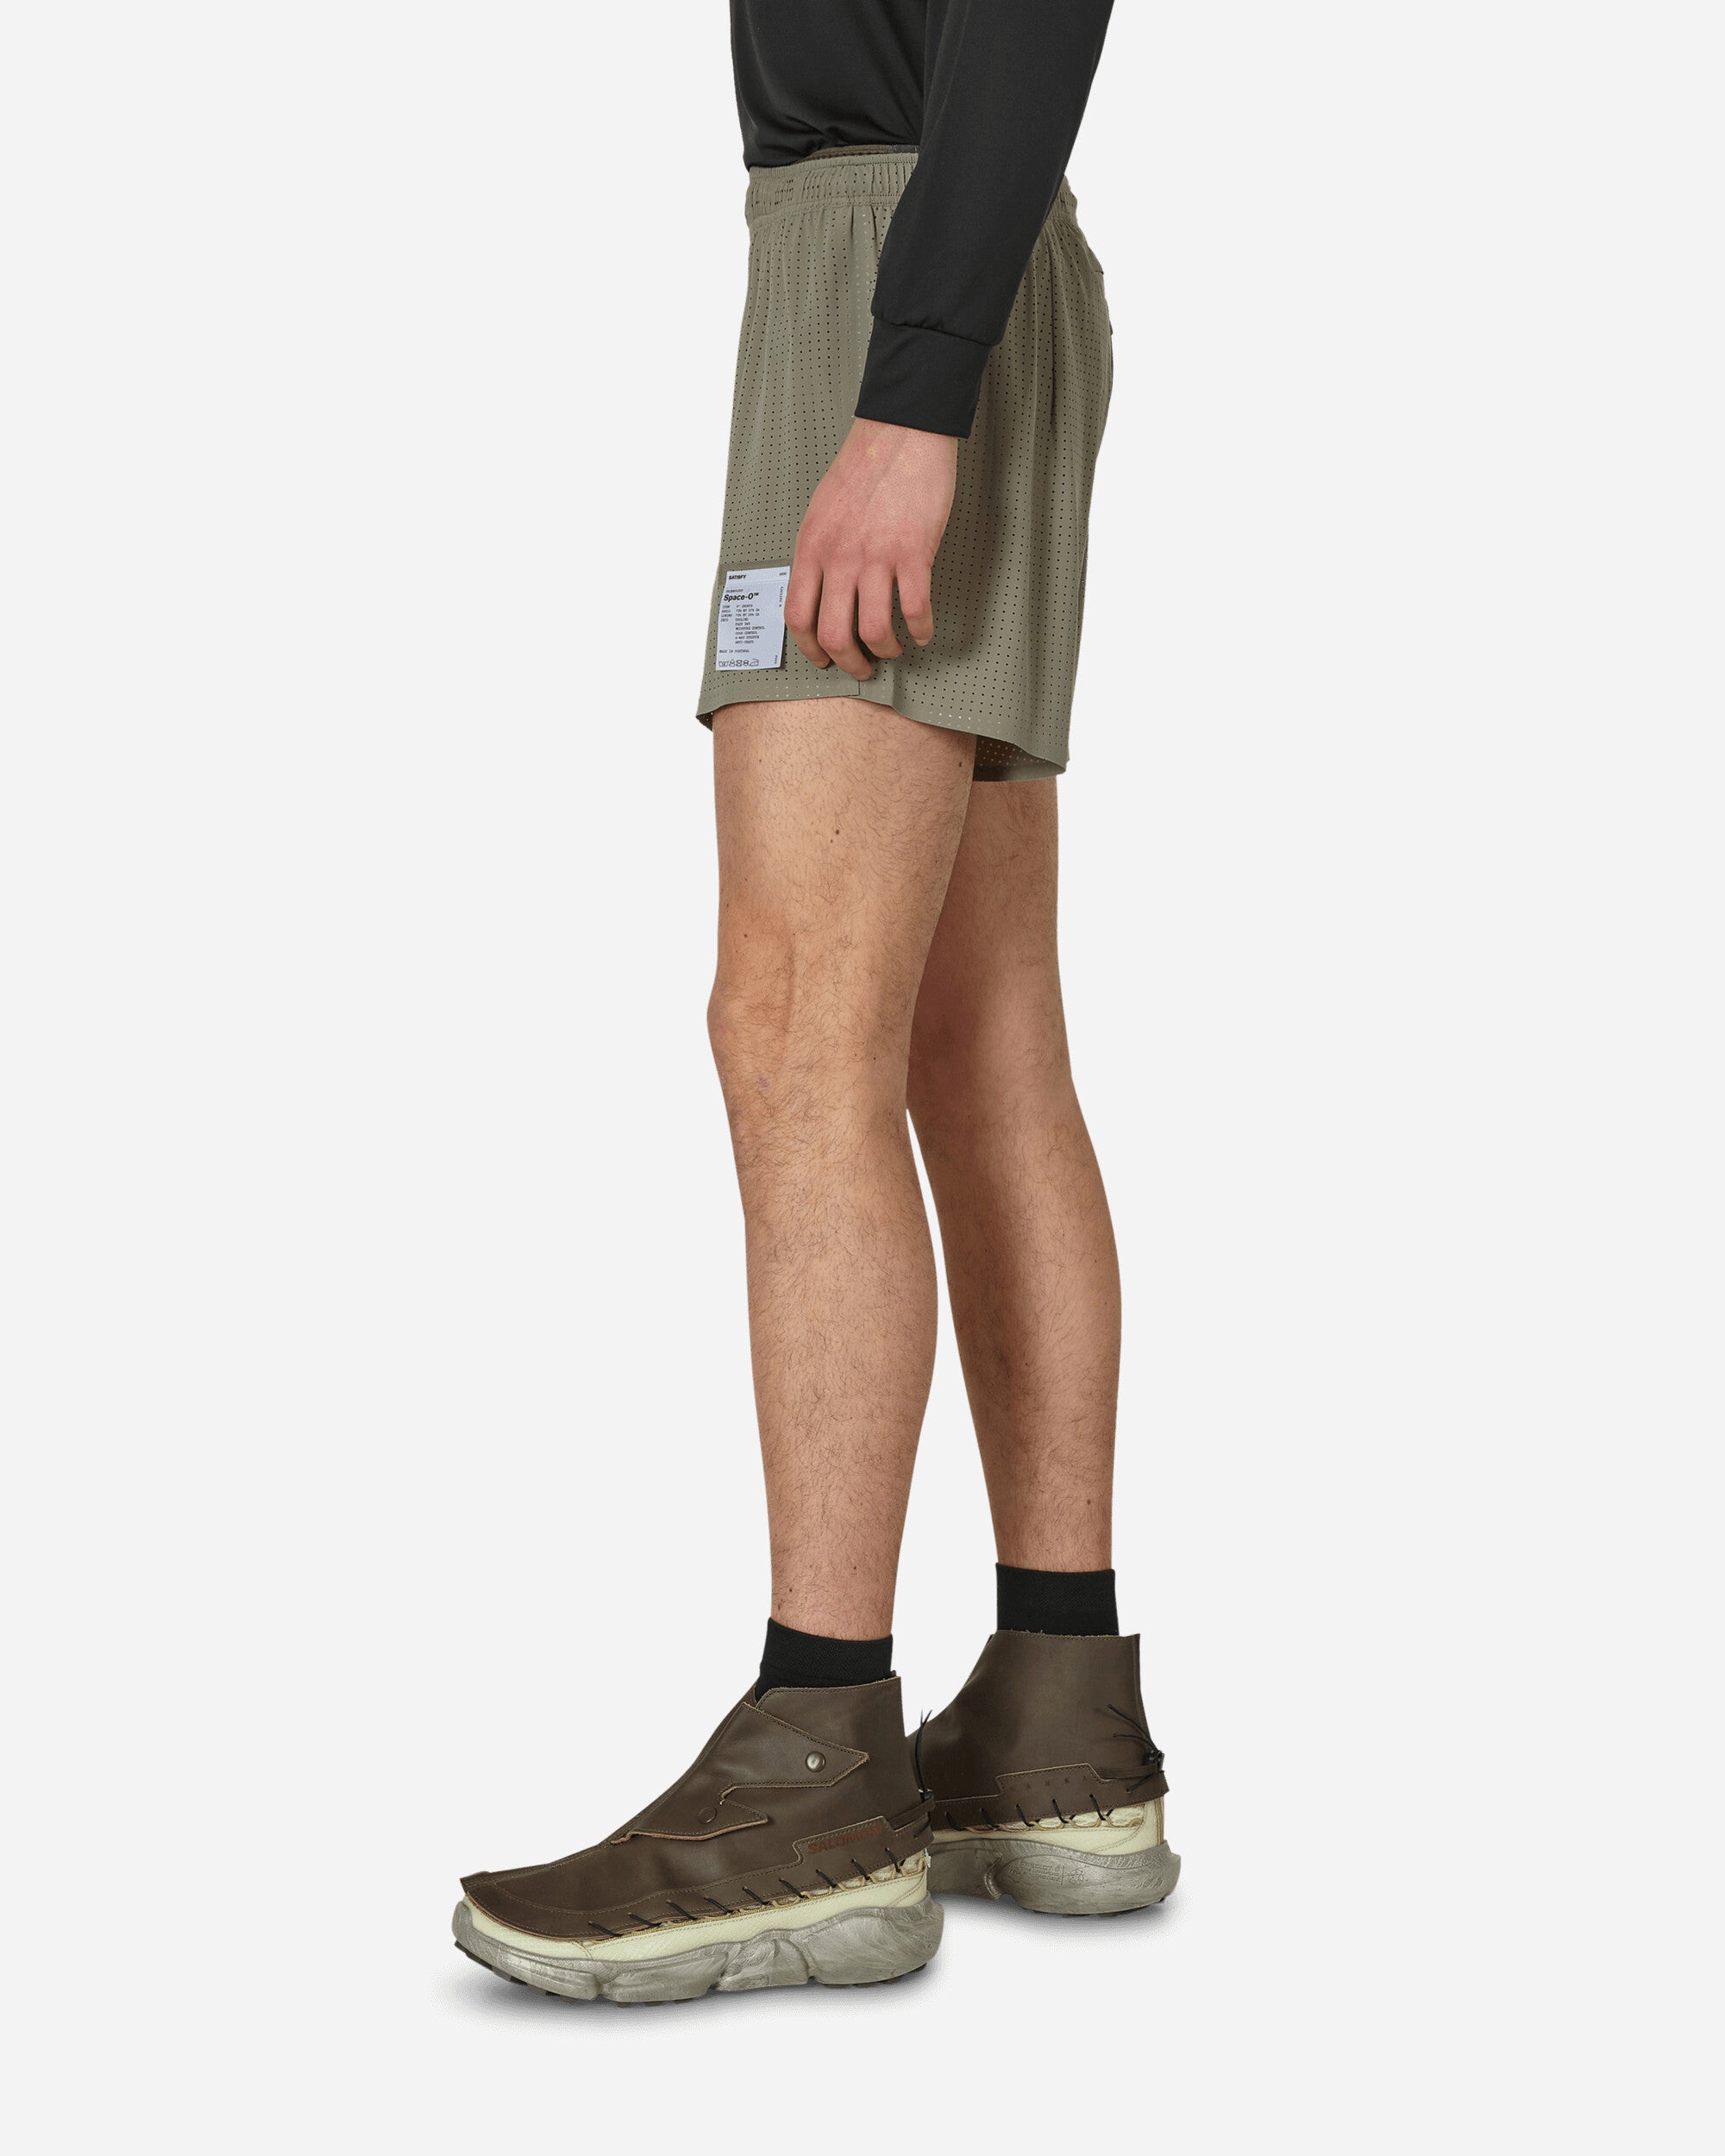 Satisfy Space-O 5" Shorts Dry Sage Shorts Short 5256 DS